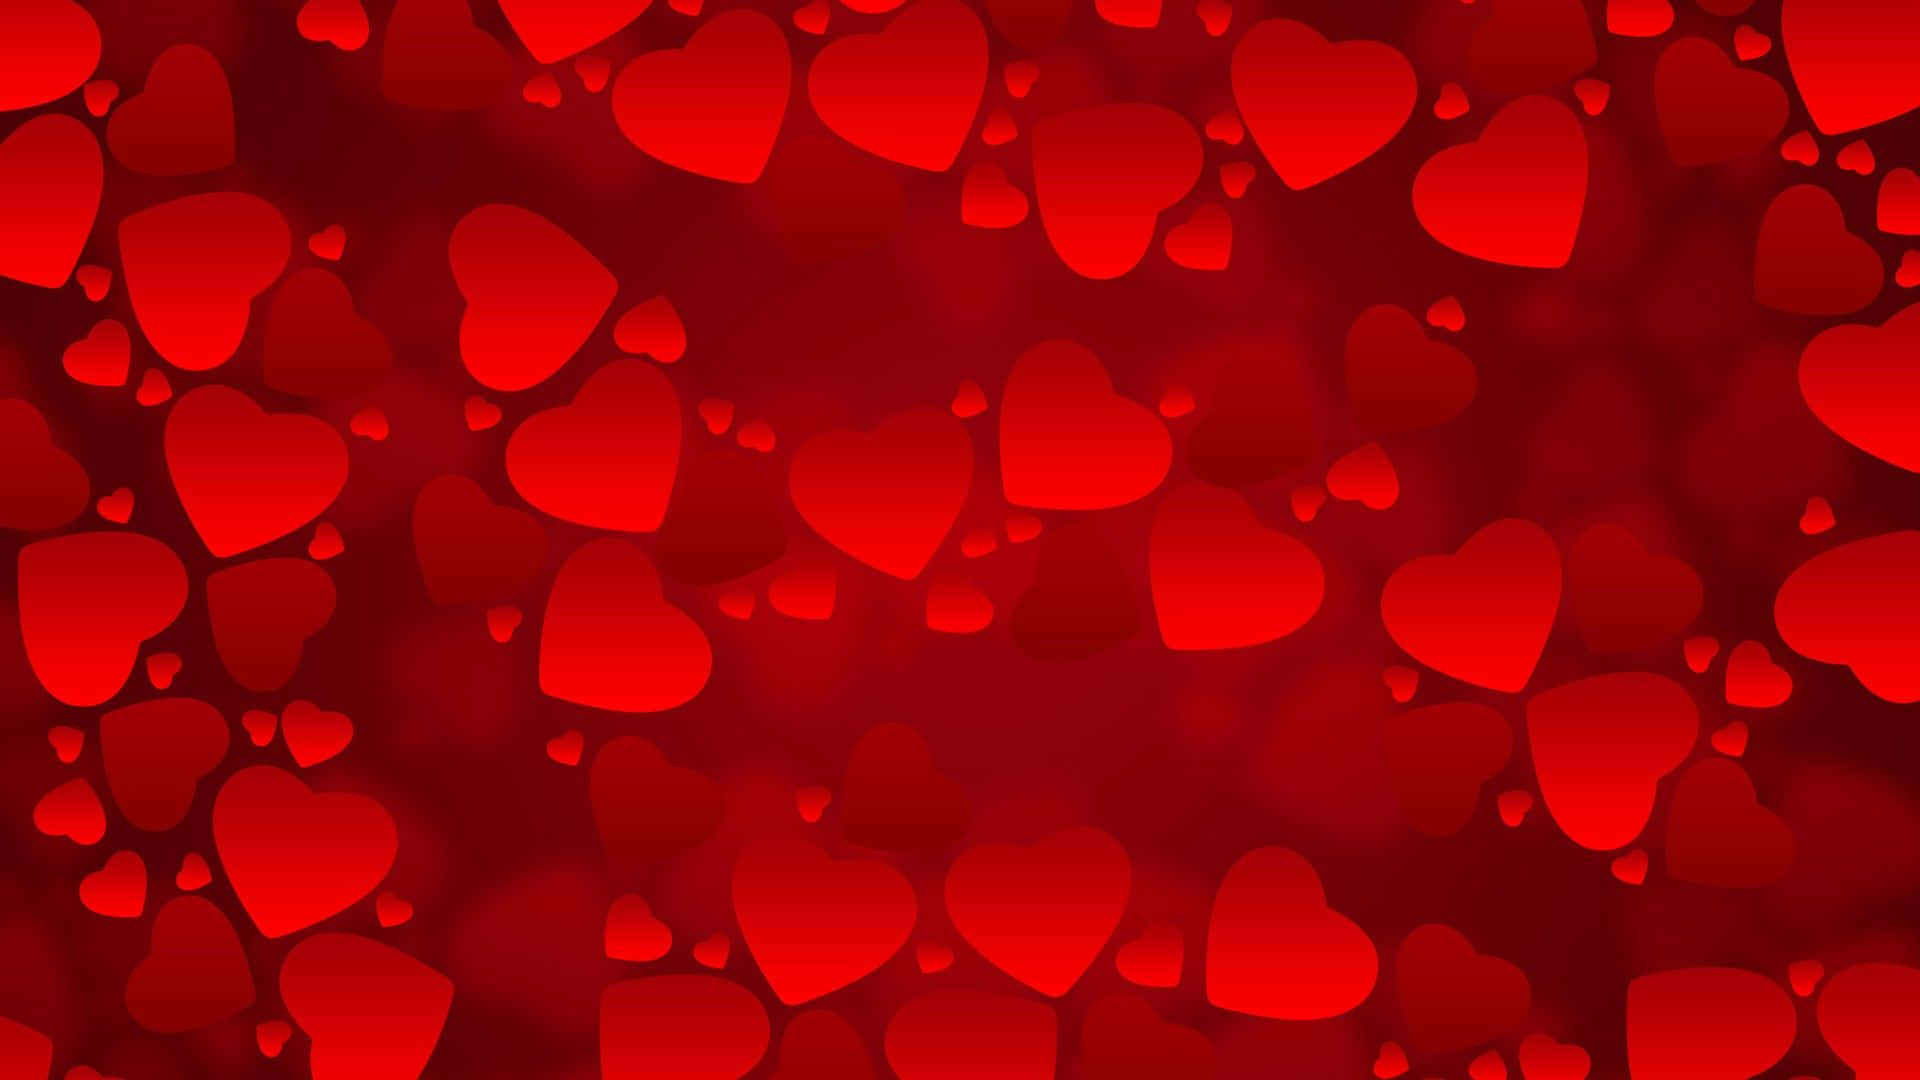 Small Glowing Hearts Background